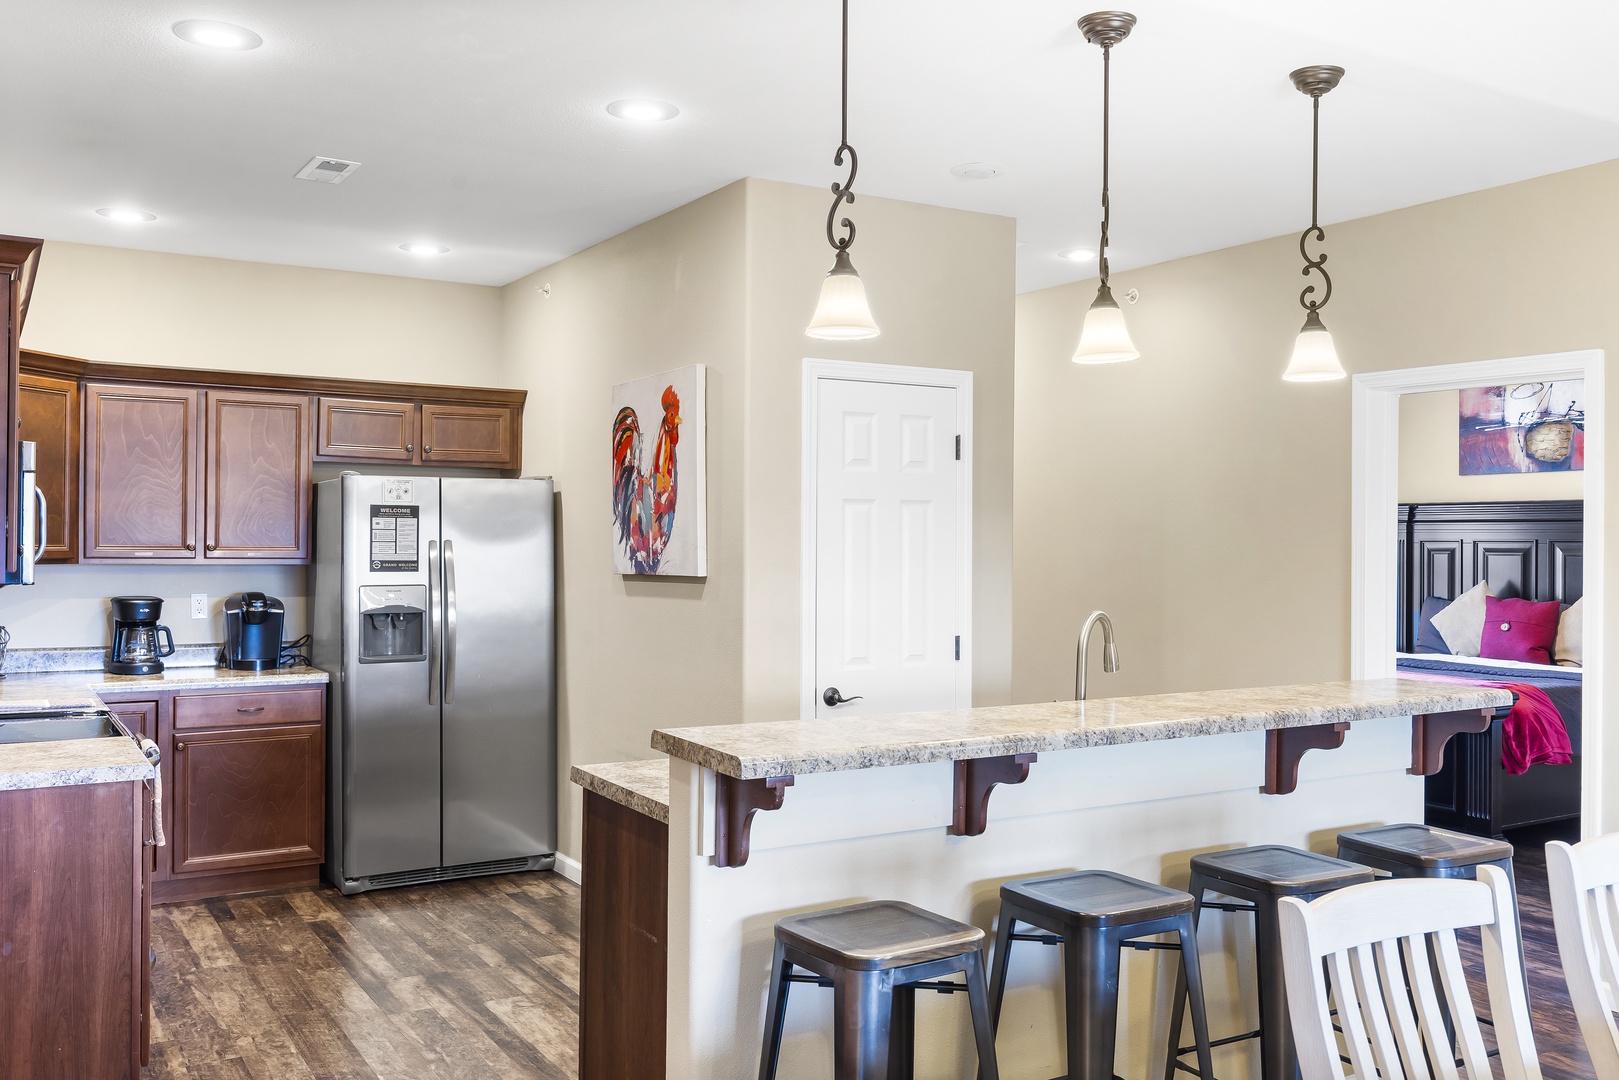 The chic, airy kitchen offers ample space & all the comforts of home